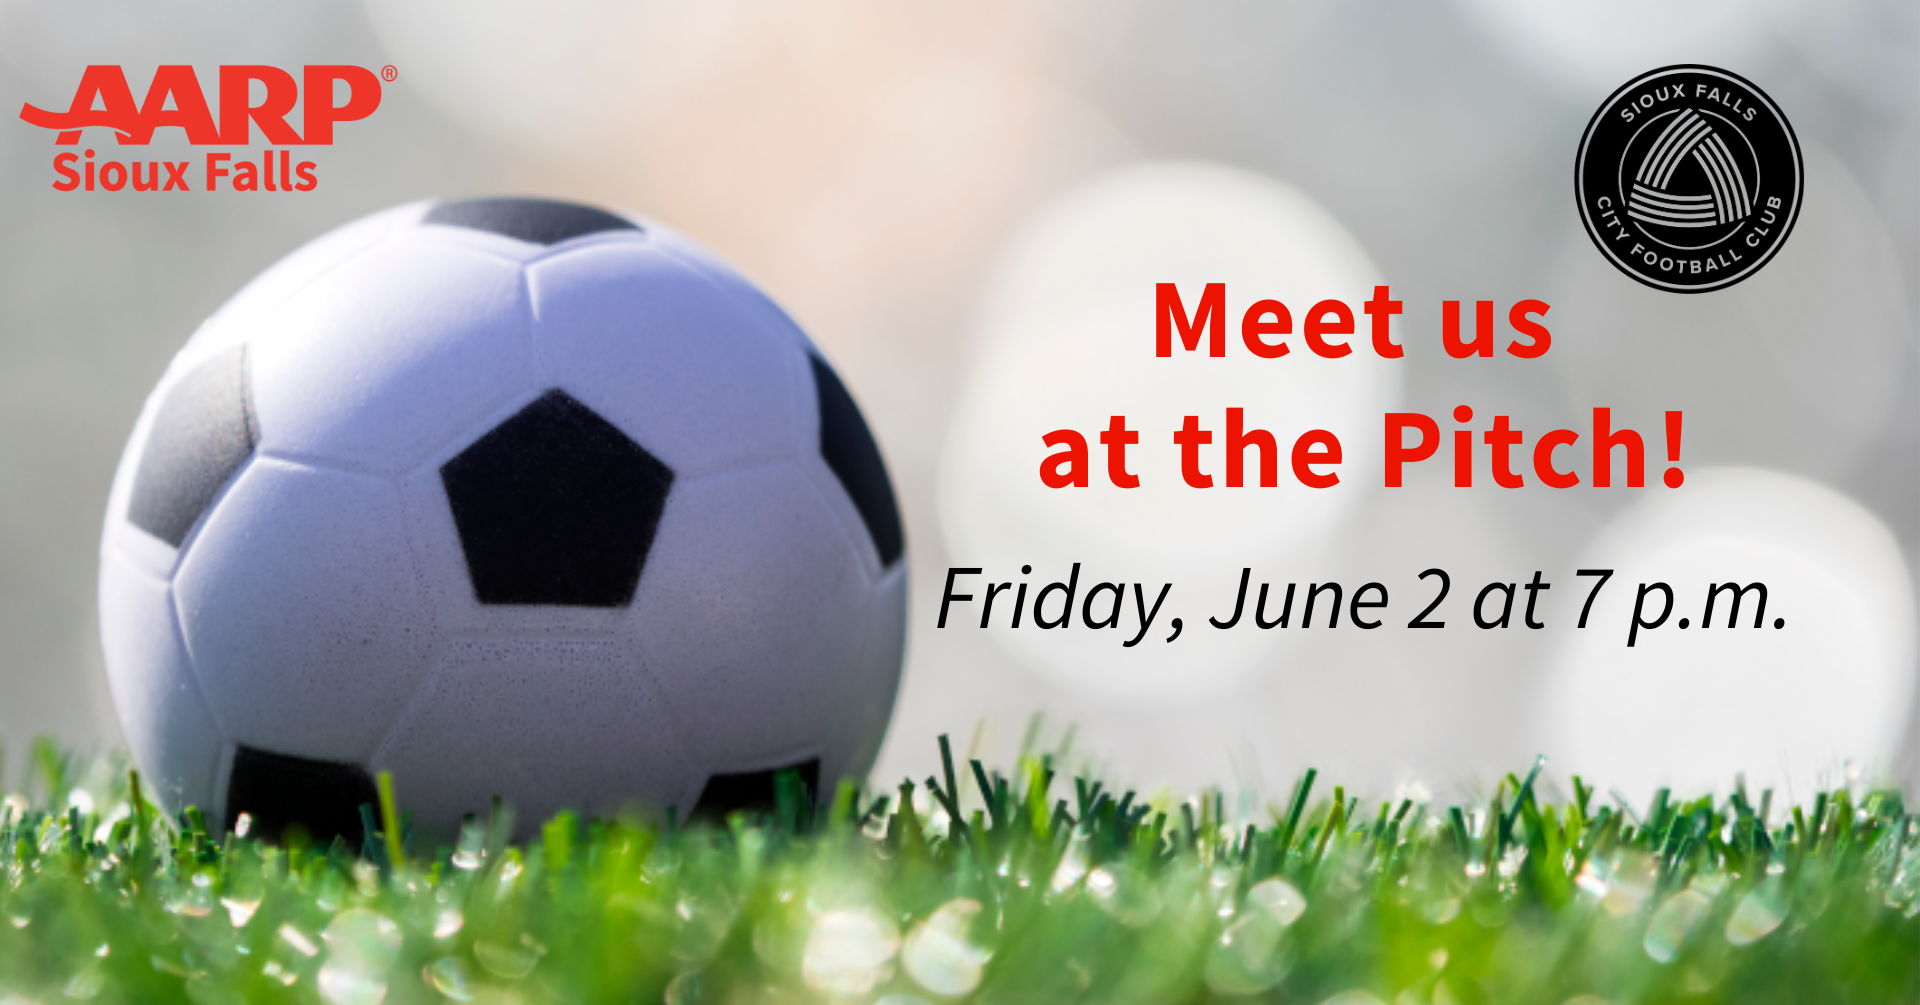 Picture of a soccer ball on grass with the text Join us at the Pitch, Friday, June 2 at 7 p.m.